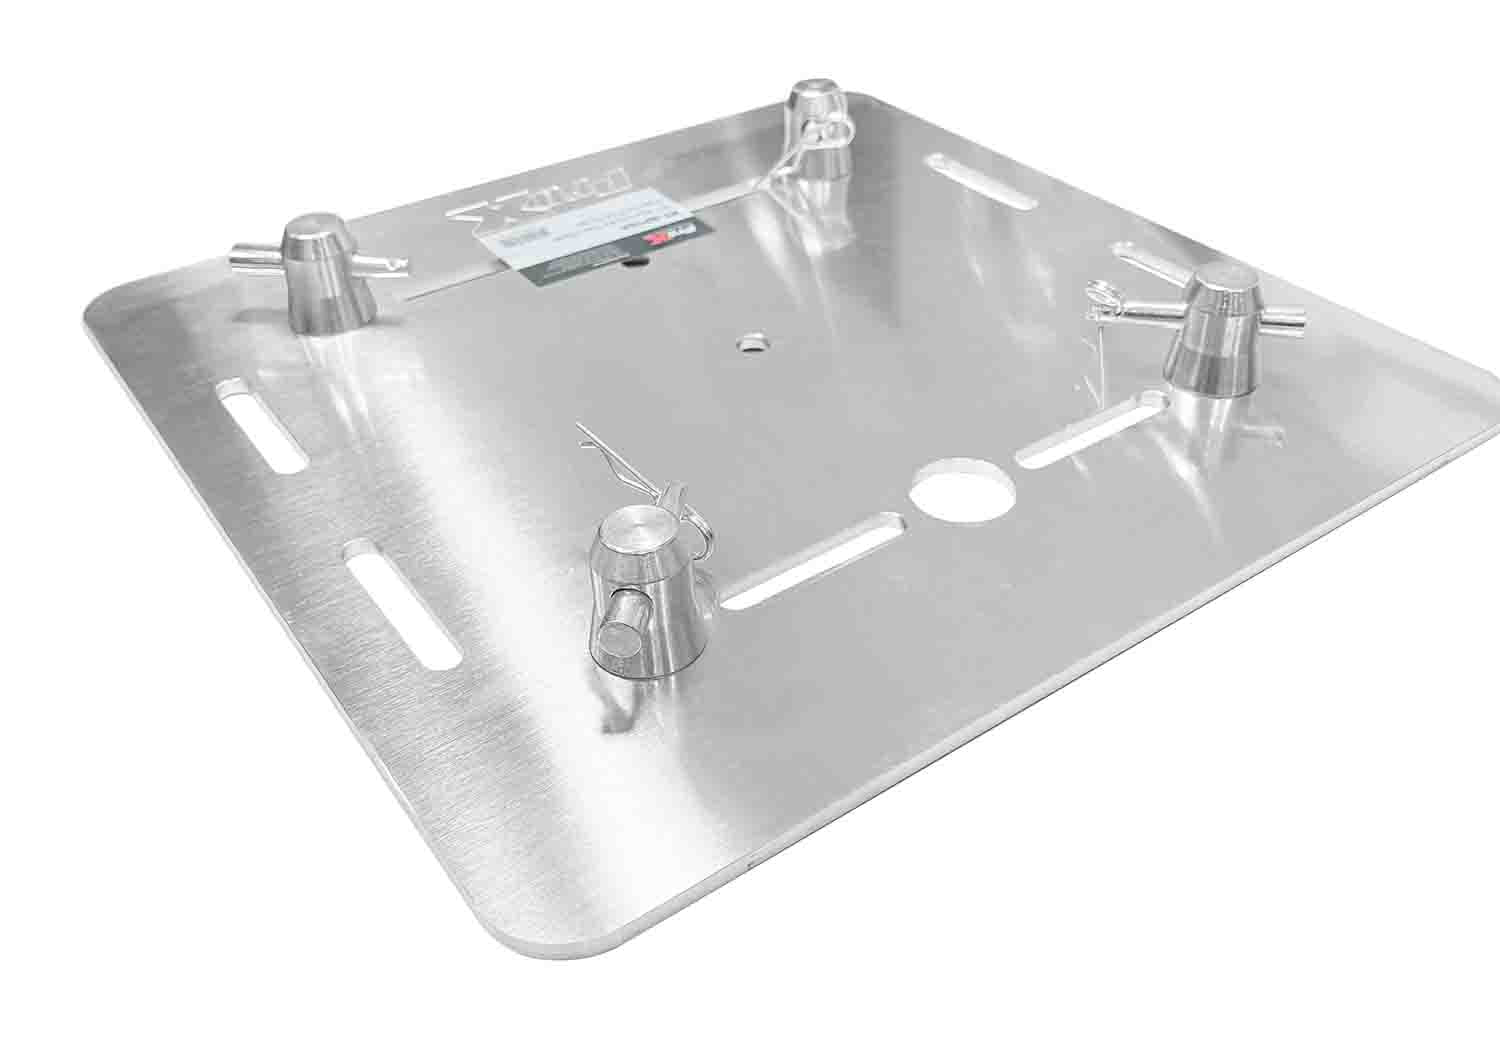 ProX XT-BP16A X2 Pack of Two 16-Inch Aluminum 6mm Truss Base Plates for F34 F32 F31 Conical Square Truss with Connectors - Hollywood DJ